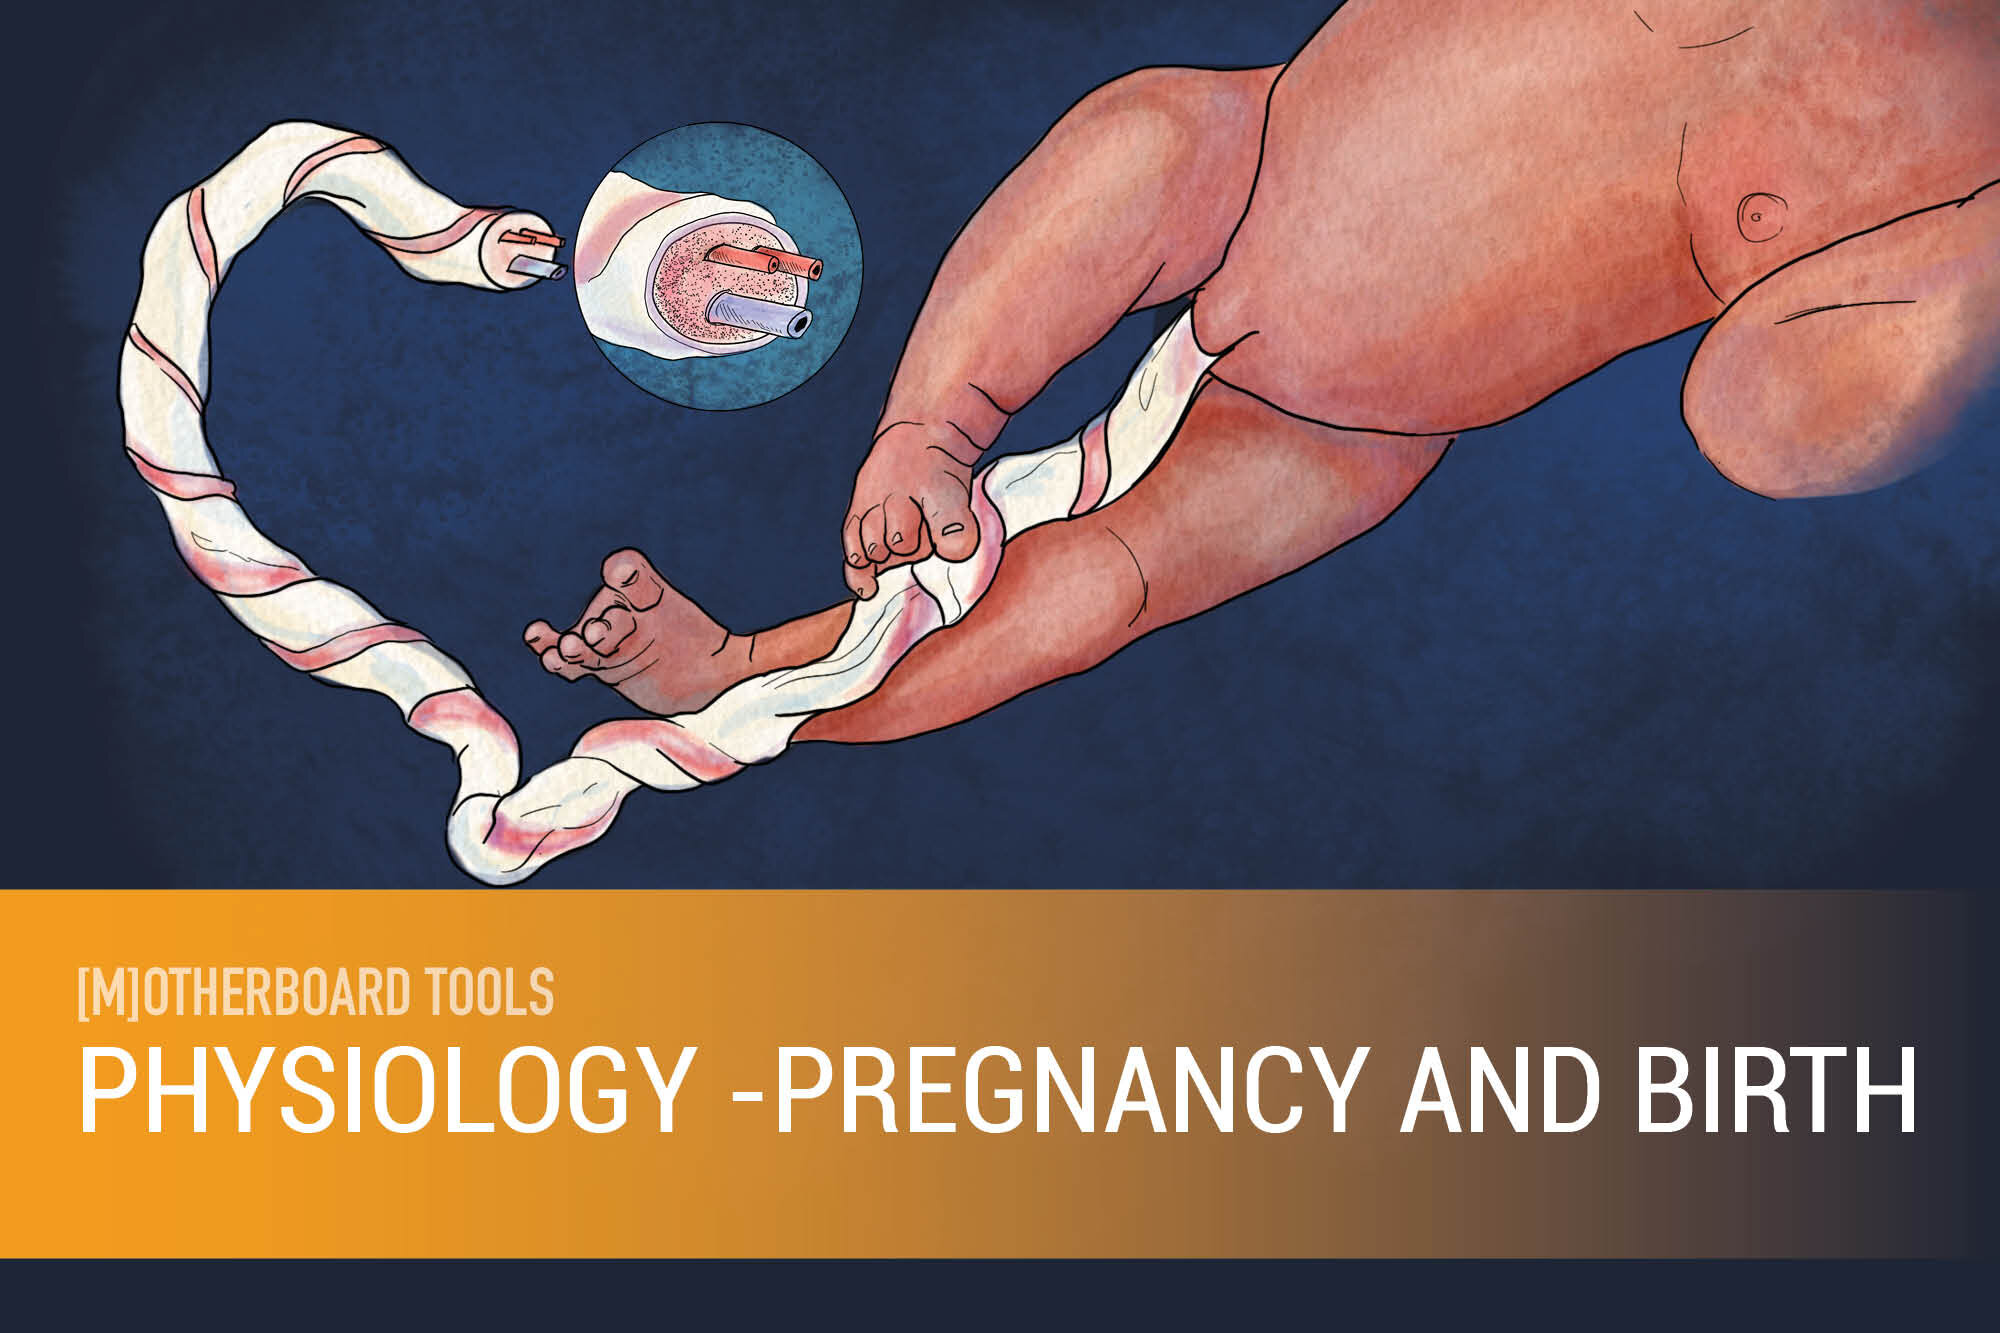 Physiology - Pregnancy and Birth